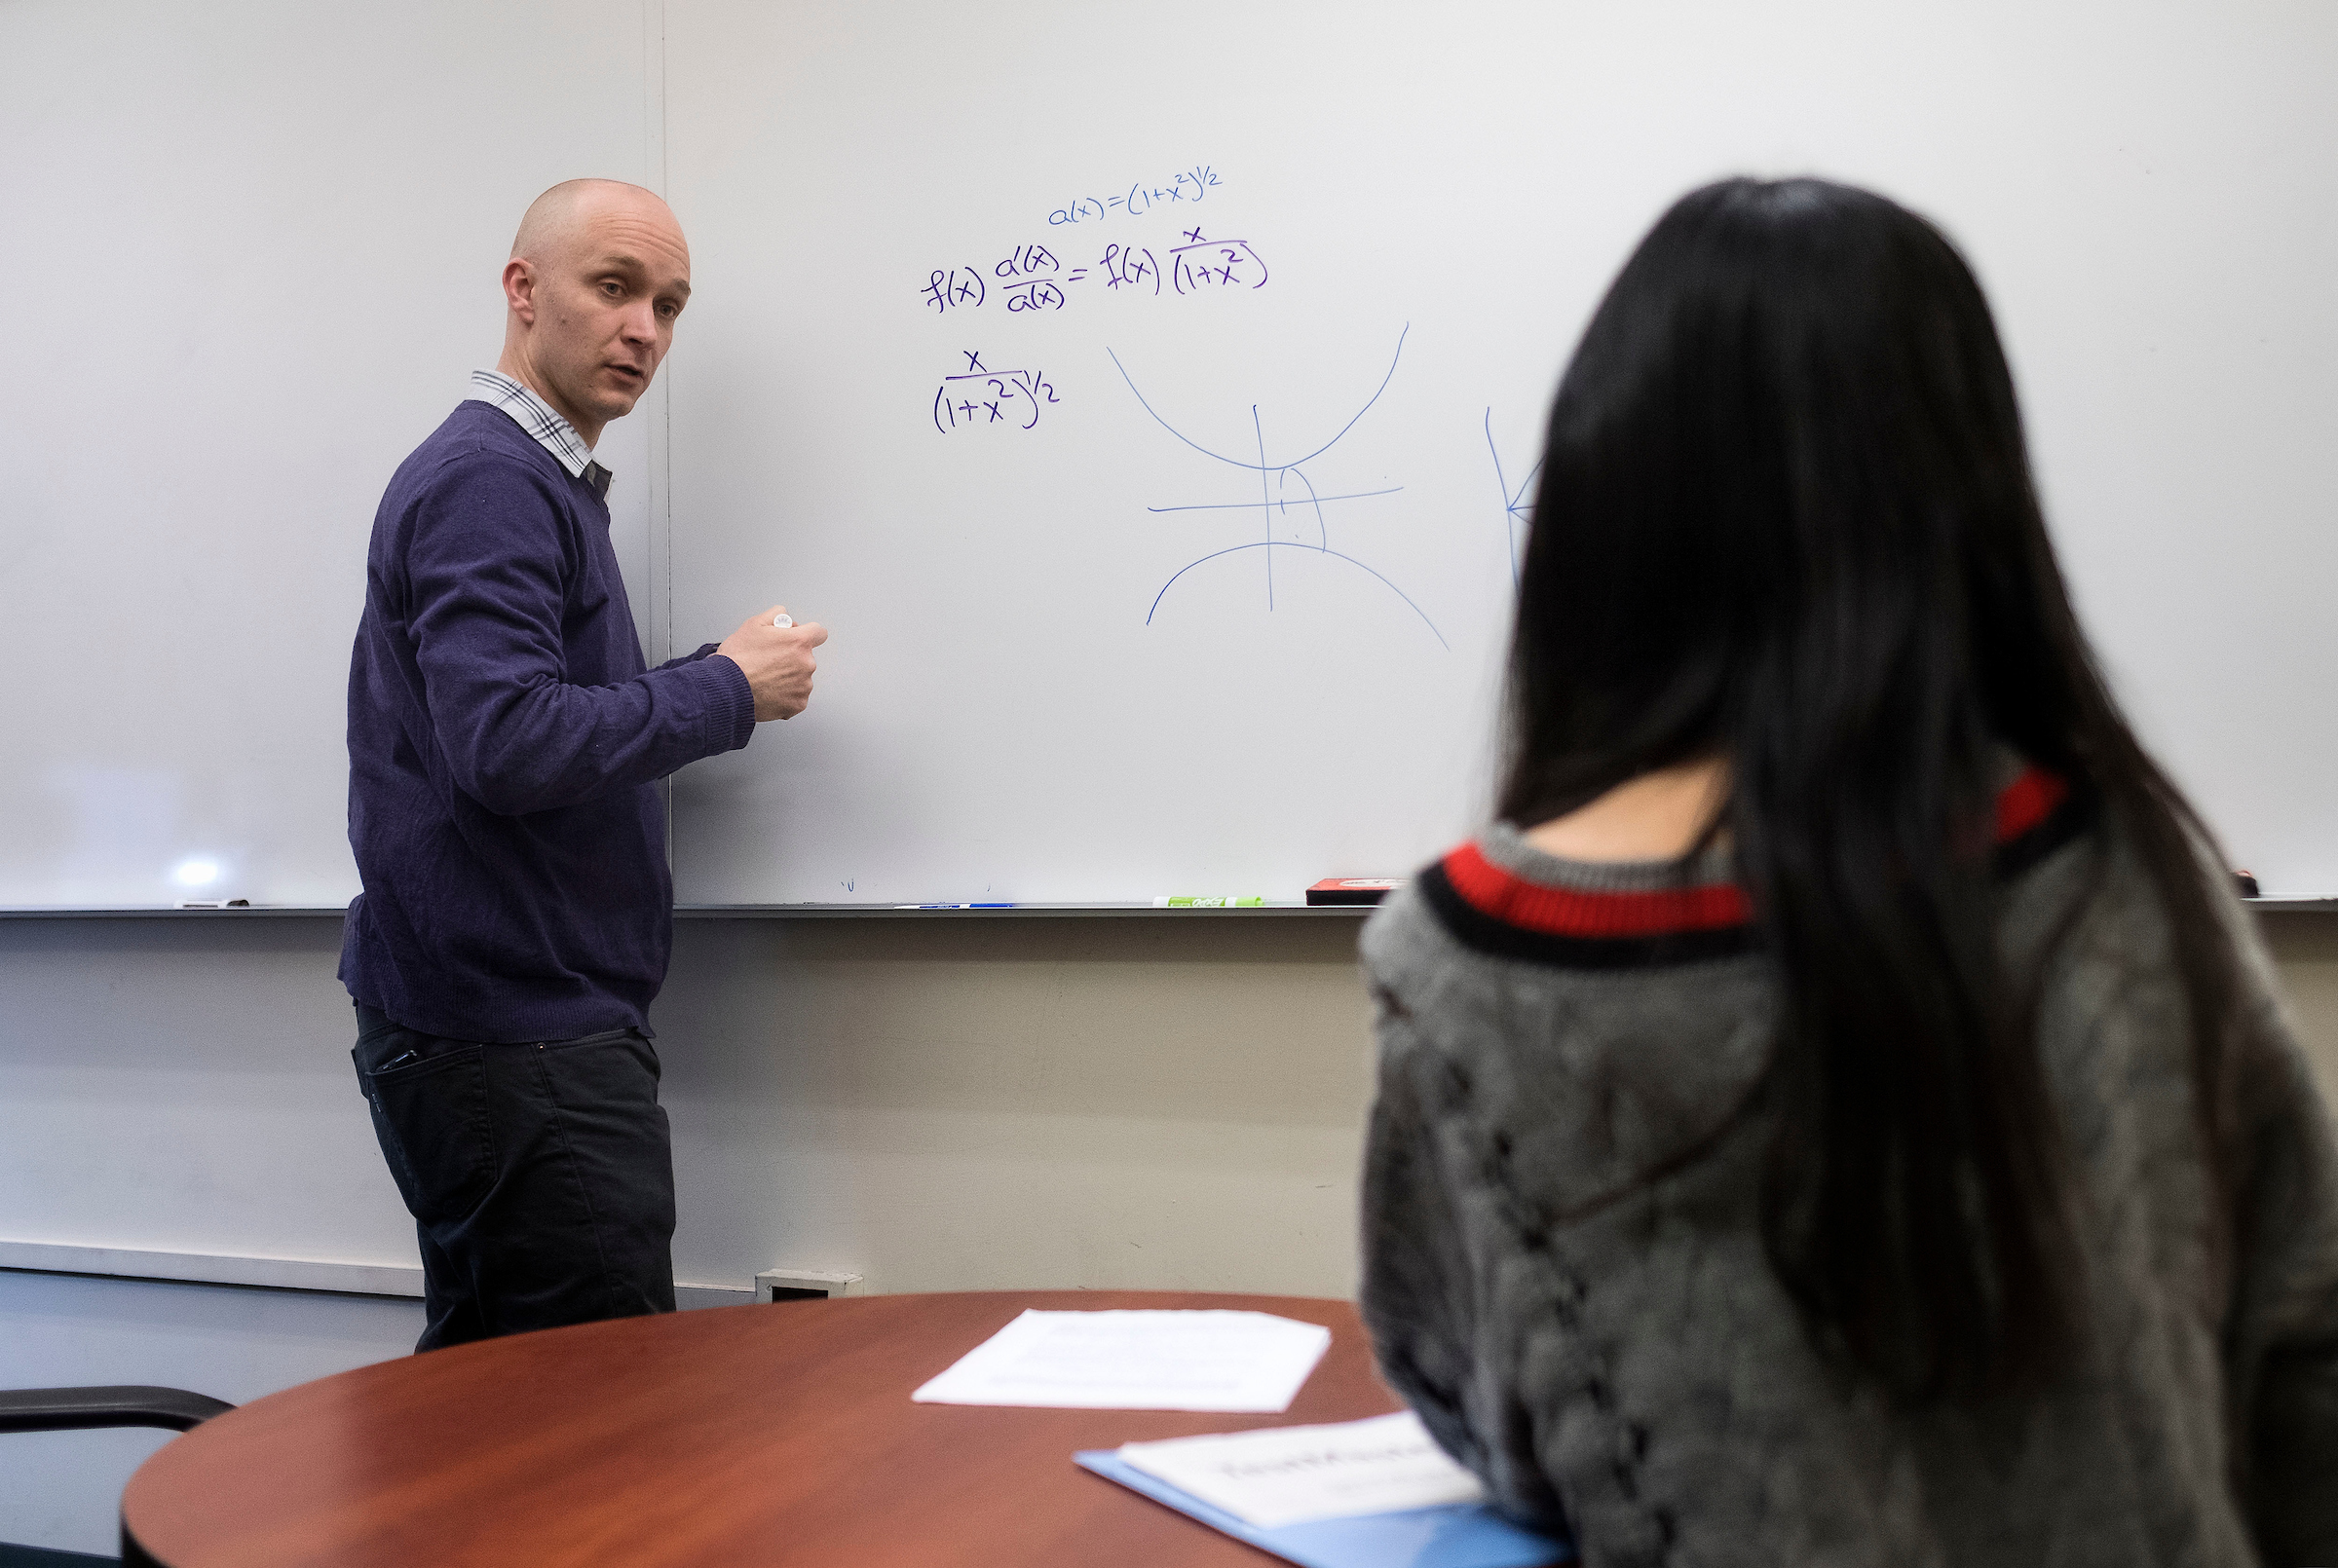 Jason Metcalfe meets with a student during office hours in Phillips Hall. ( photo by Jon Gardiner) He is drawing mathematics equations on a whiteboard while talking to the student.